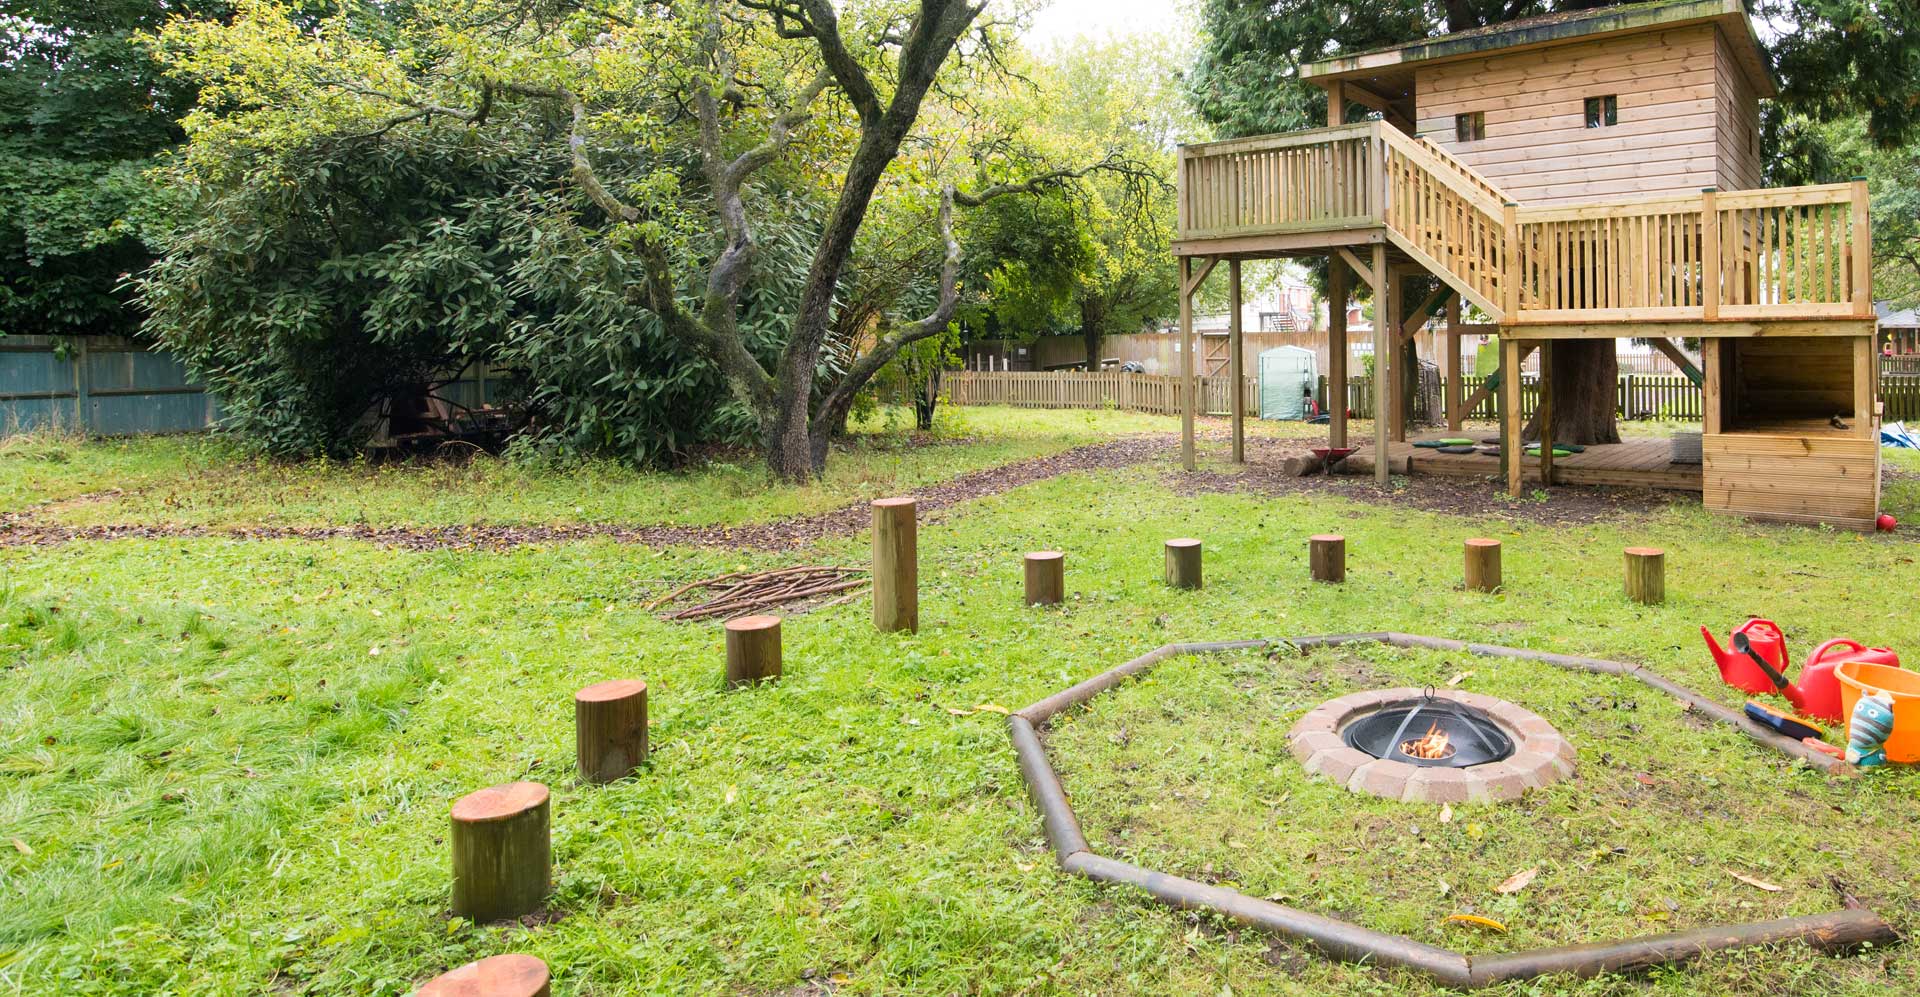 Royal Earlswood Forest School Fire pit